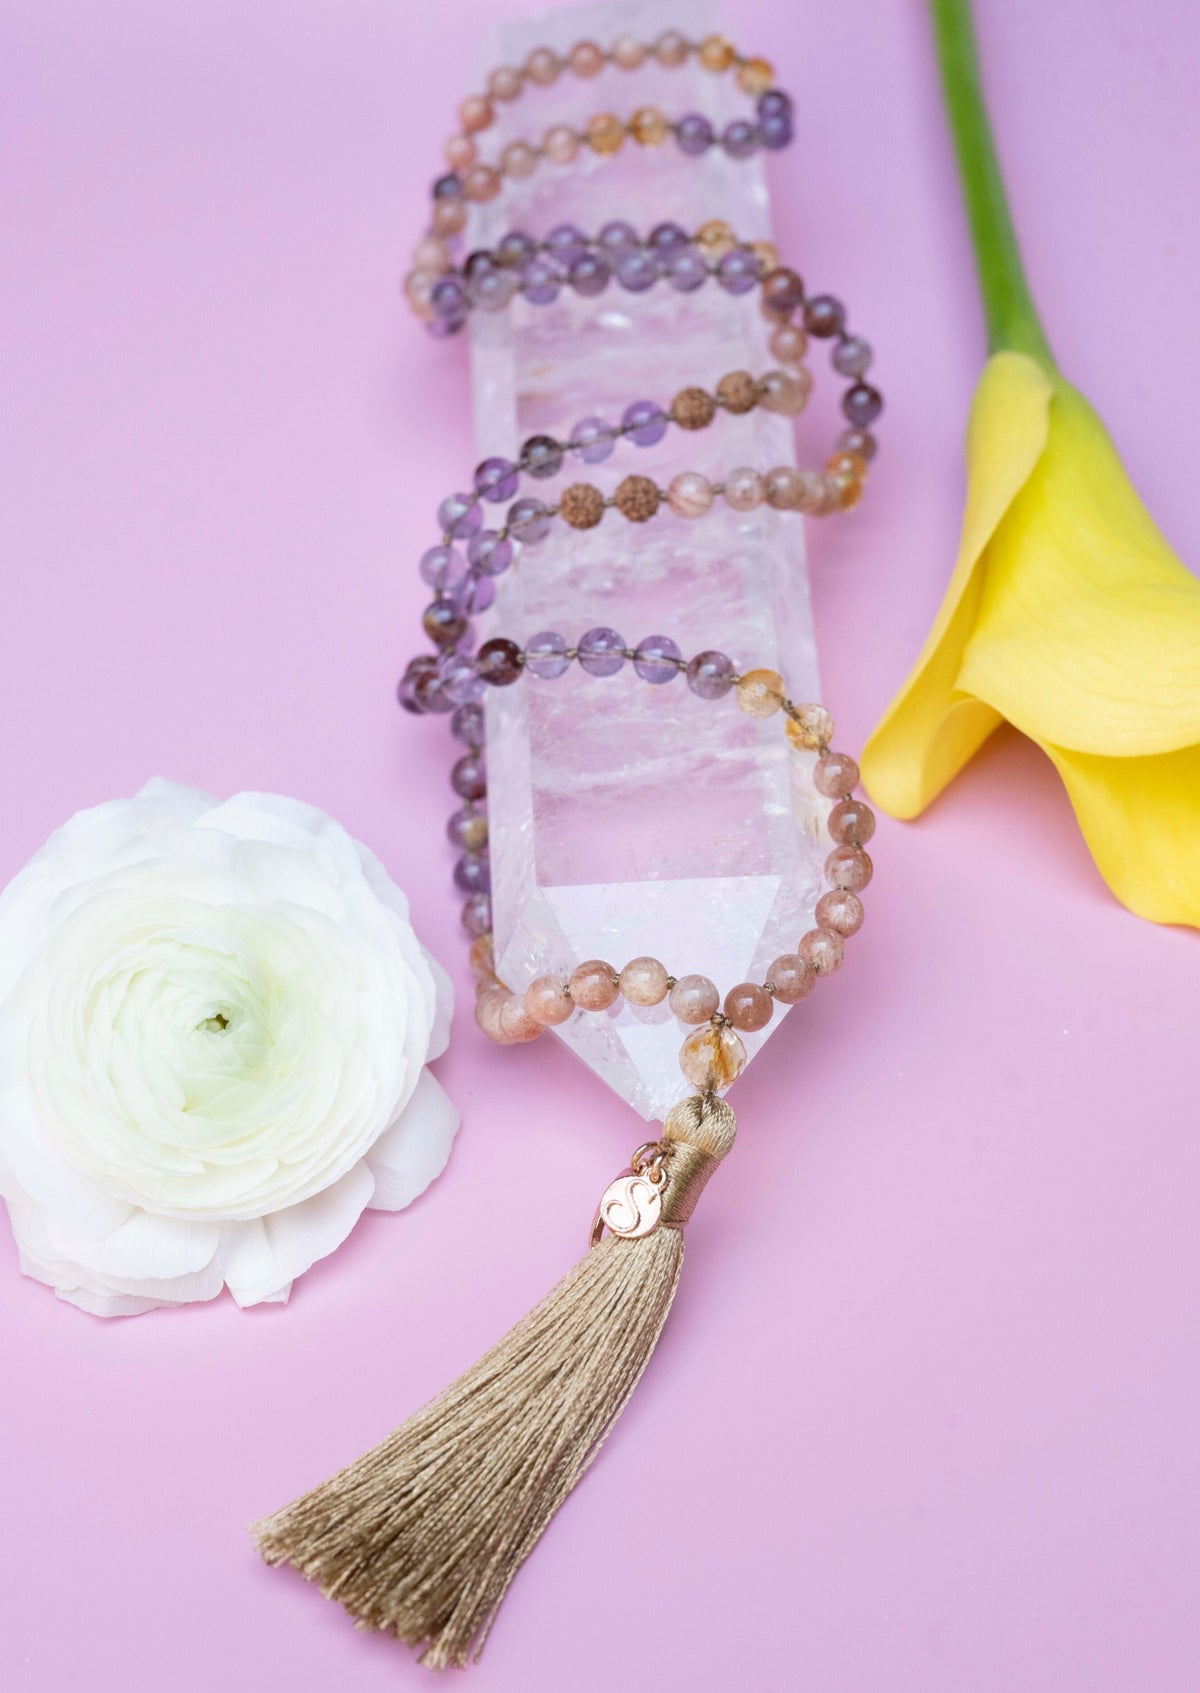 AURA of Peaceful New Beginnings | Centred in Truth to your ‘Self’